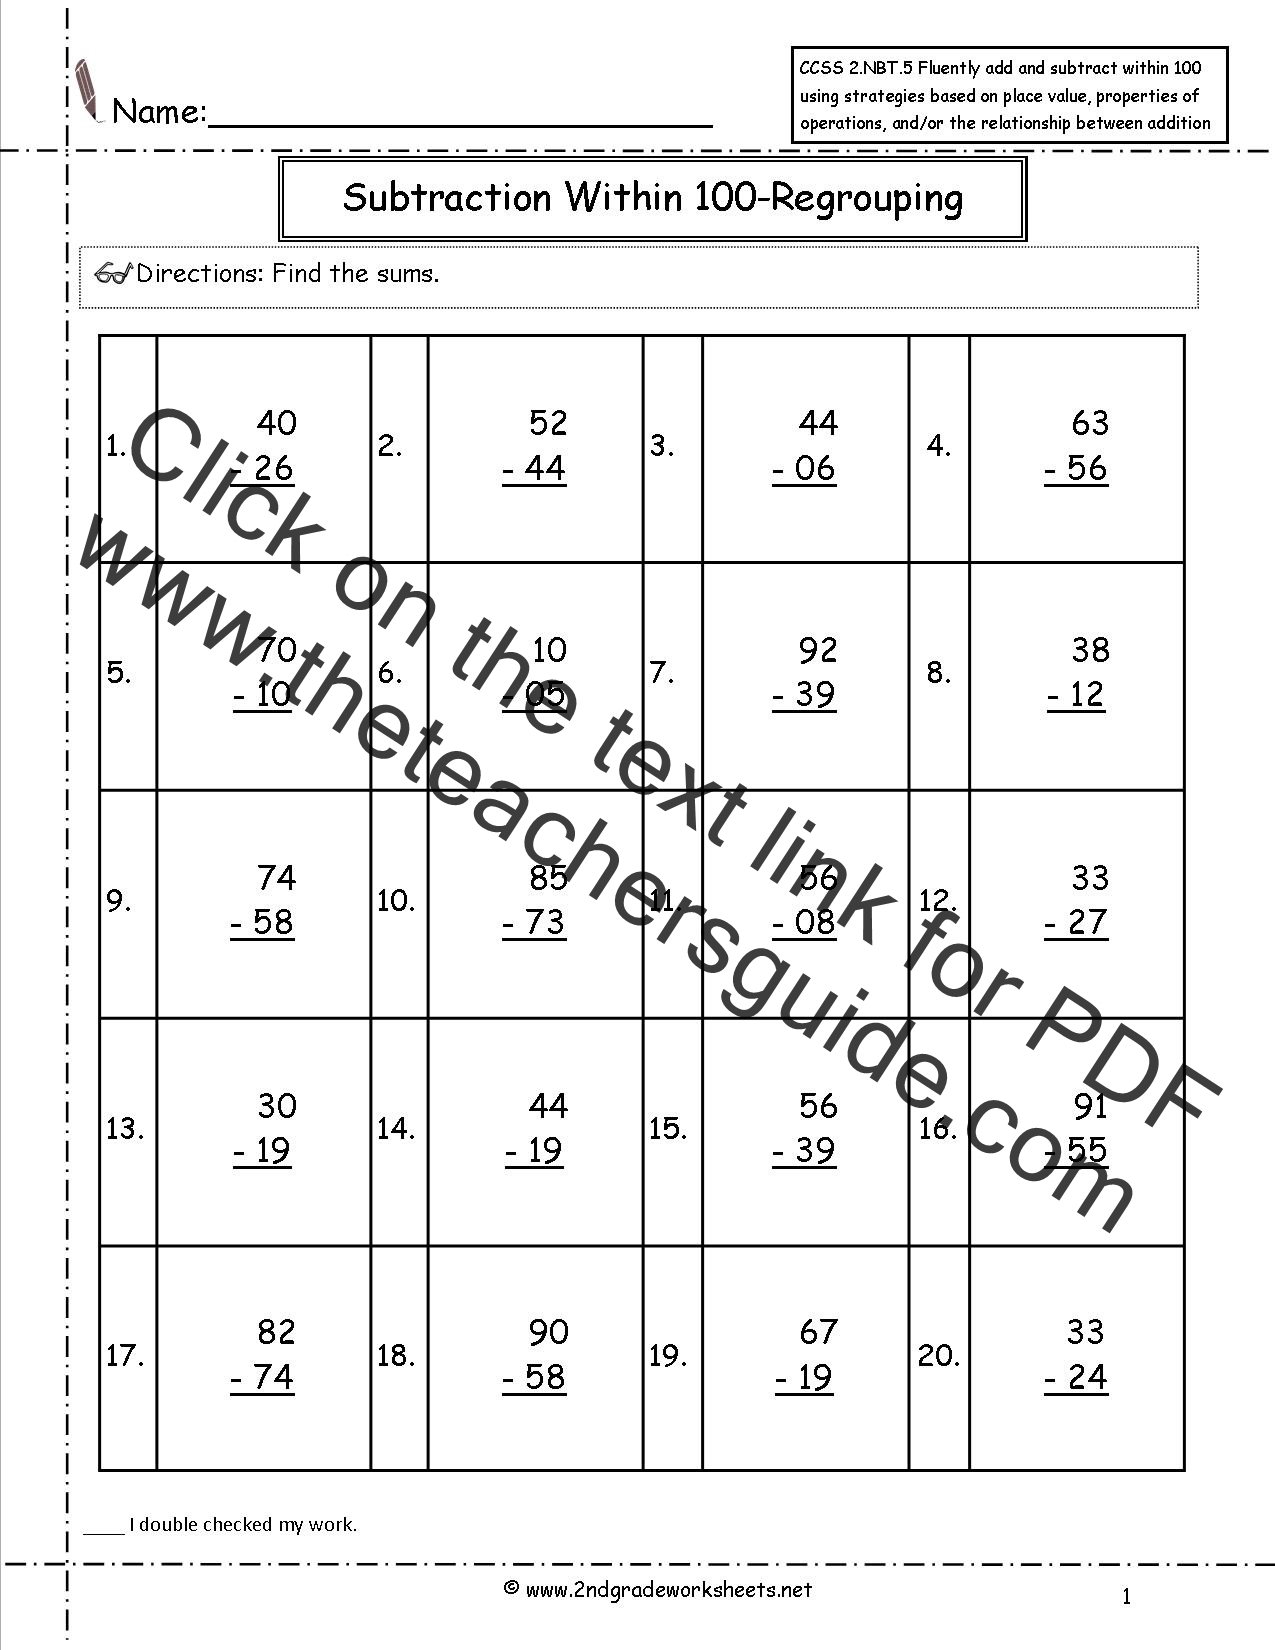 double-digit-subtraction-without-regrouping-printable-3-digit-subtraction-without-regrouping